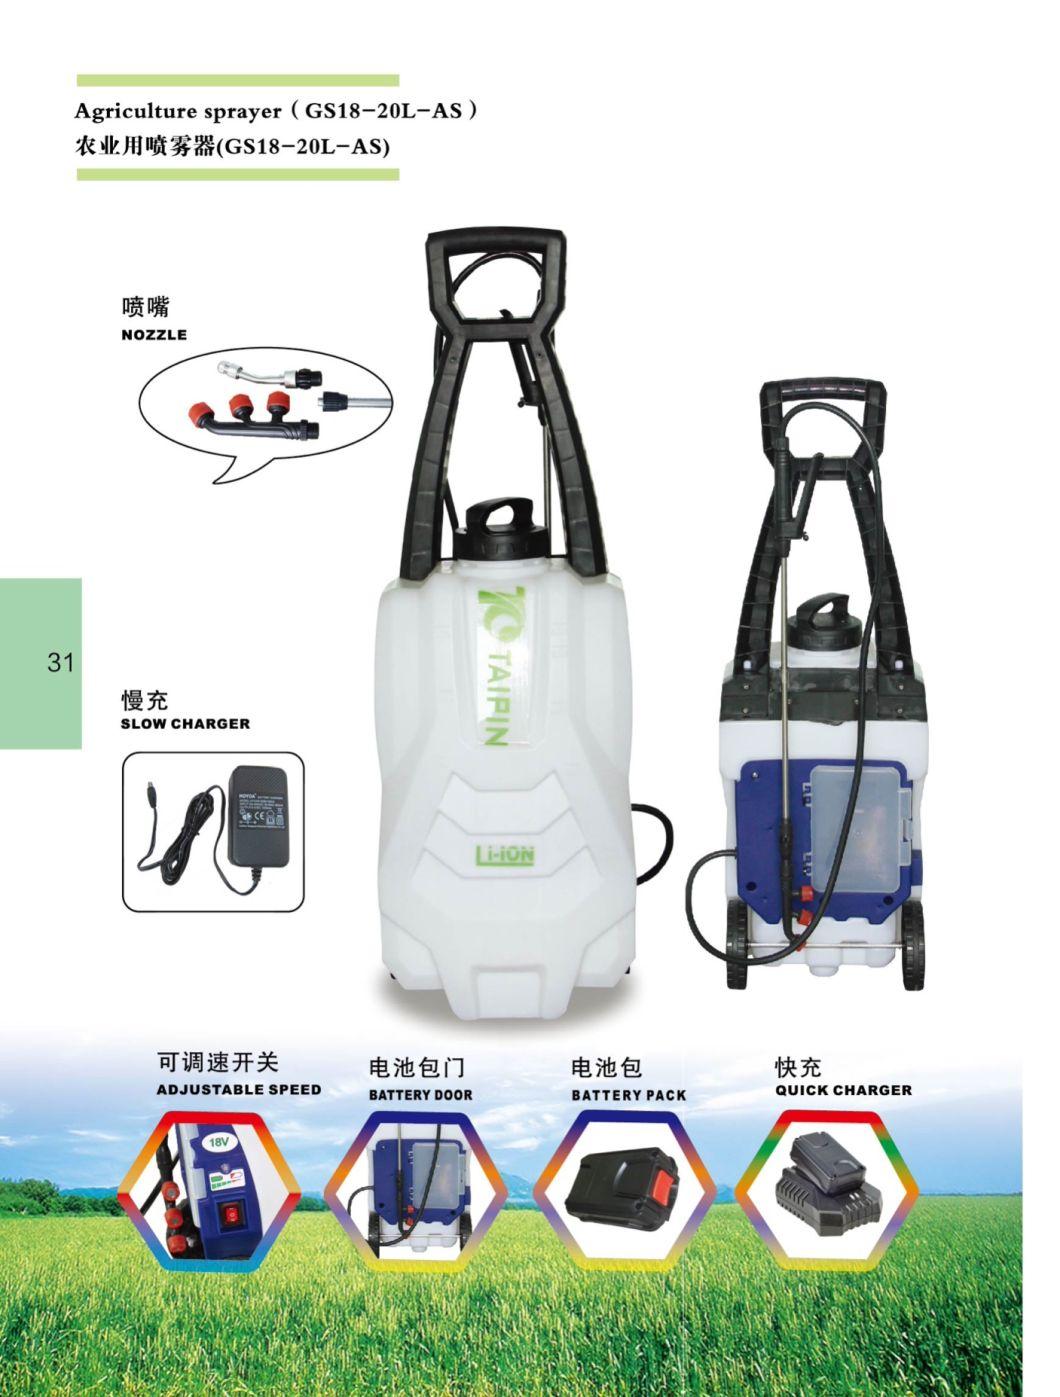 China OEM Big Tank 40L 20L Battery Operated Weed Pressure Sprayer on Trailer with Wheels for Tree Orchard